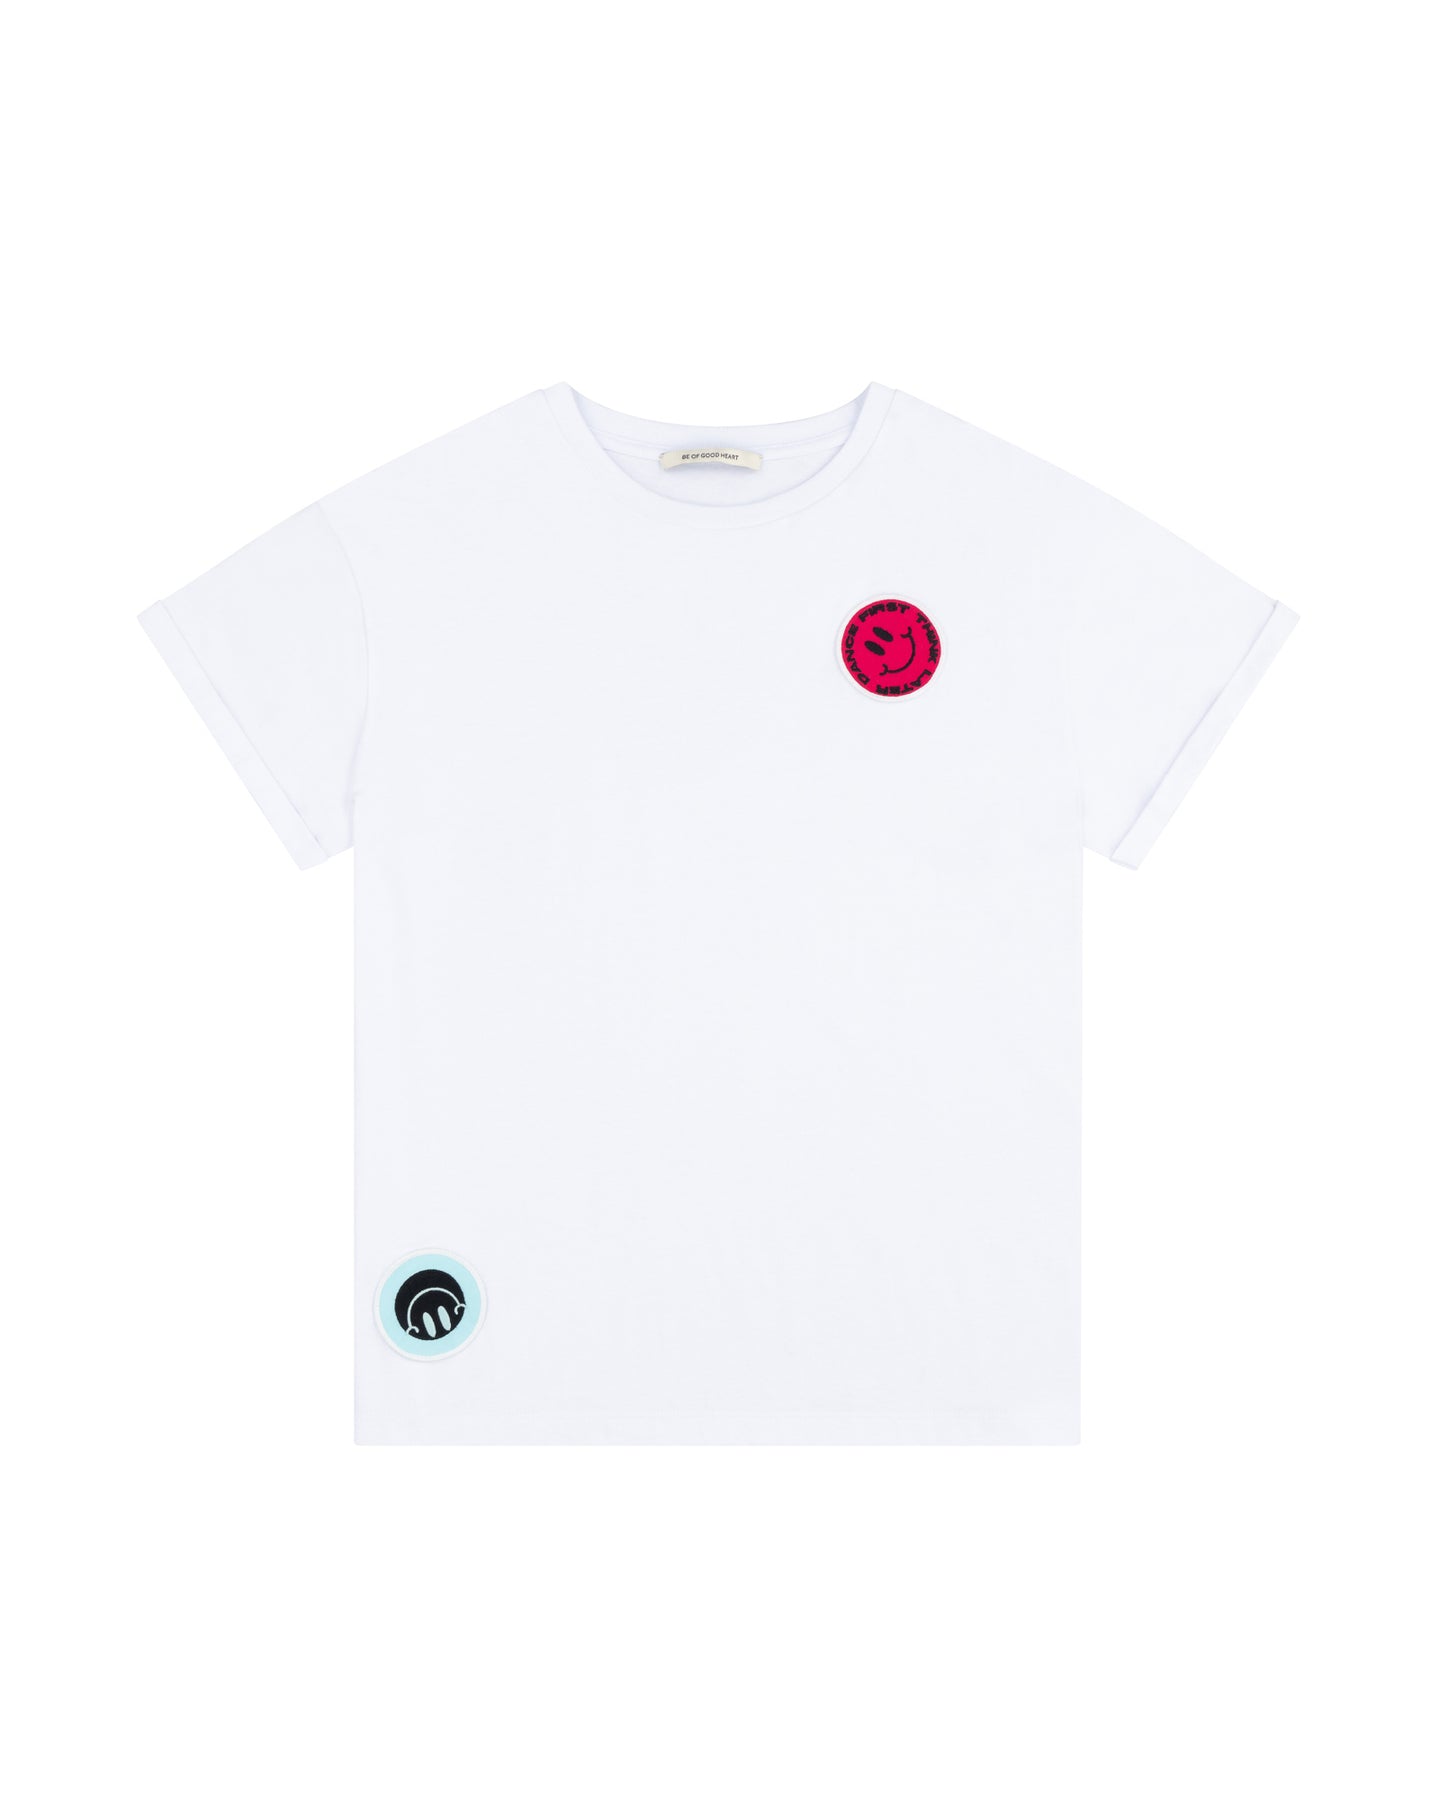 Etre Cecile Rave Smiley Oversize Tee - White 